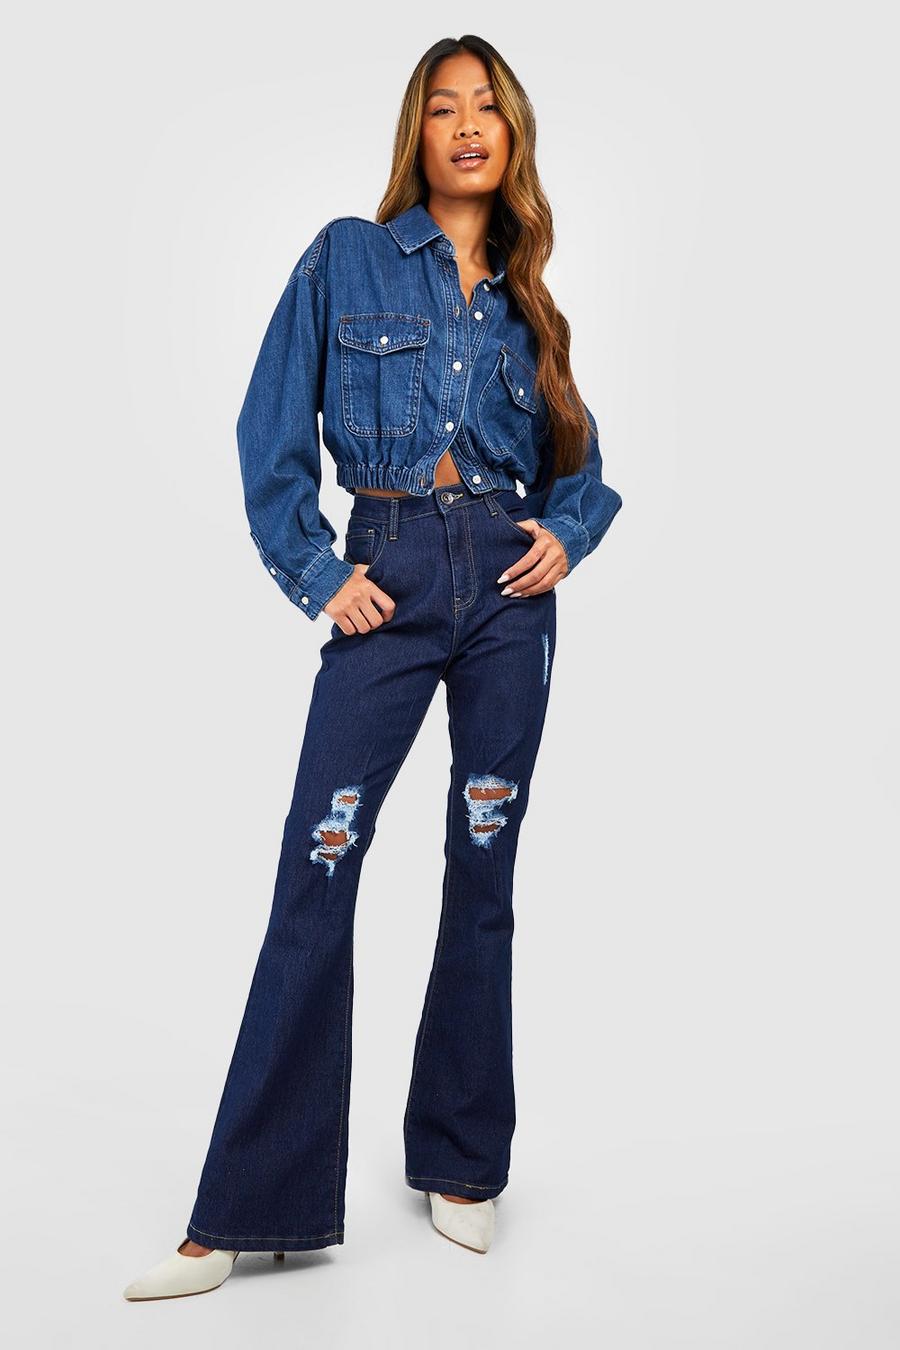 Indigo High Waisted Ripped outd Jeans